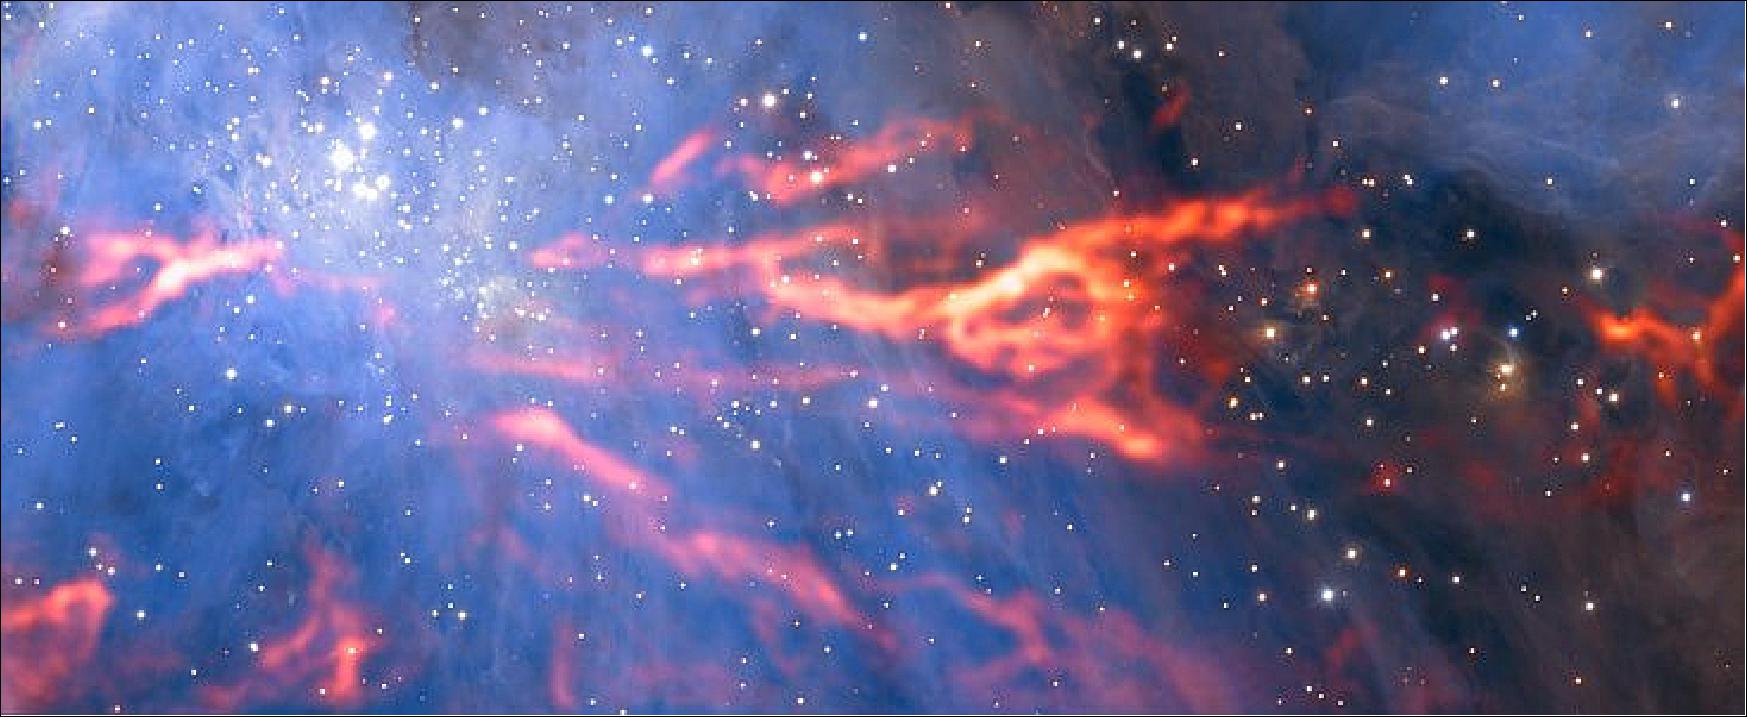 Figure 22: New data from ALMA and other telescopes have been used to create this stunning image showing a web of filaments in the Orion Nebula. These features appear red-hot and fiery in this dramatic picture, but in reality are so cold that astronomers must use telescopes like ALMA to observe them (image credit: ESO)